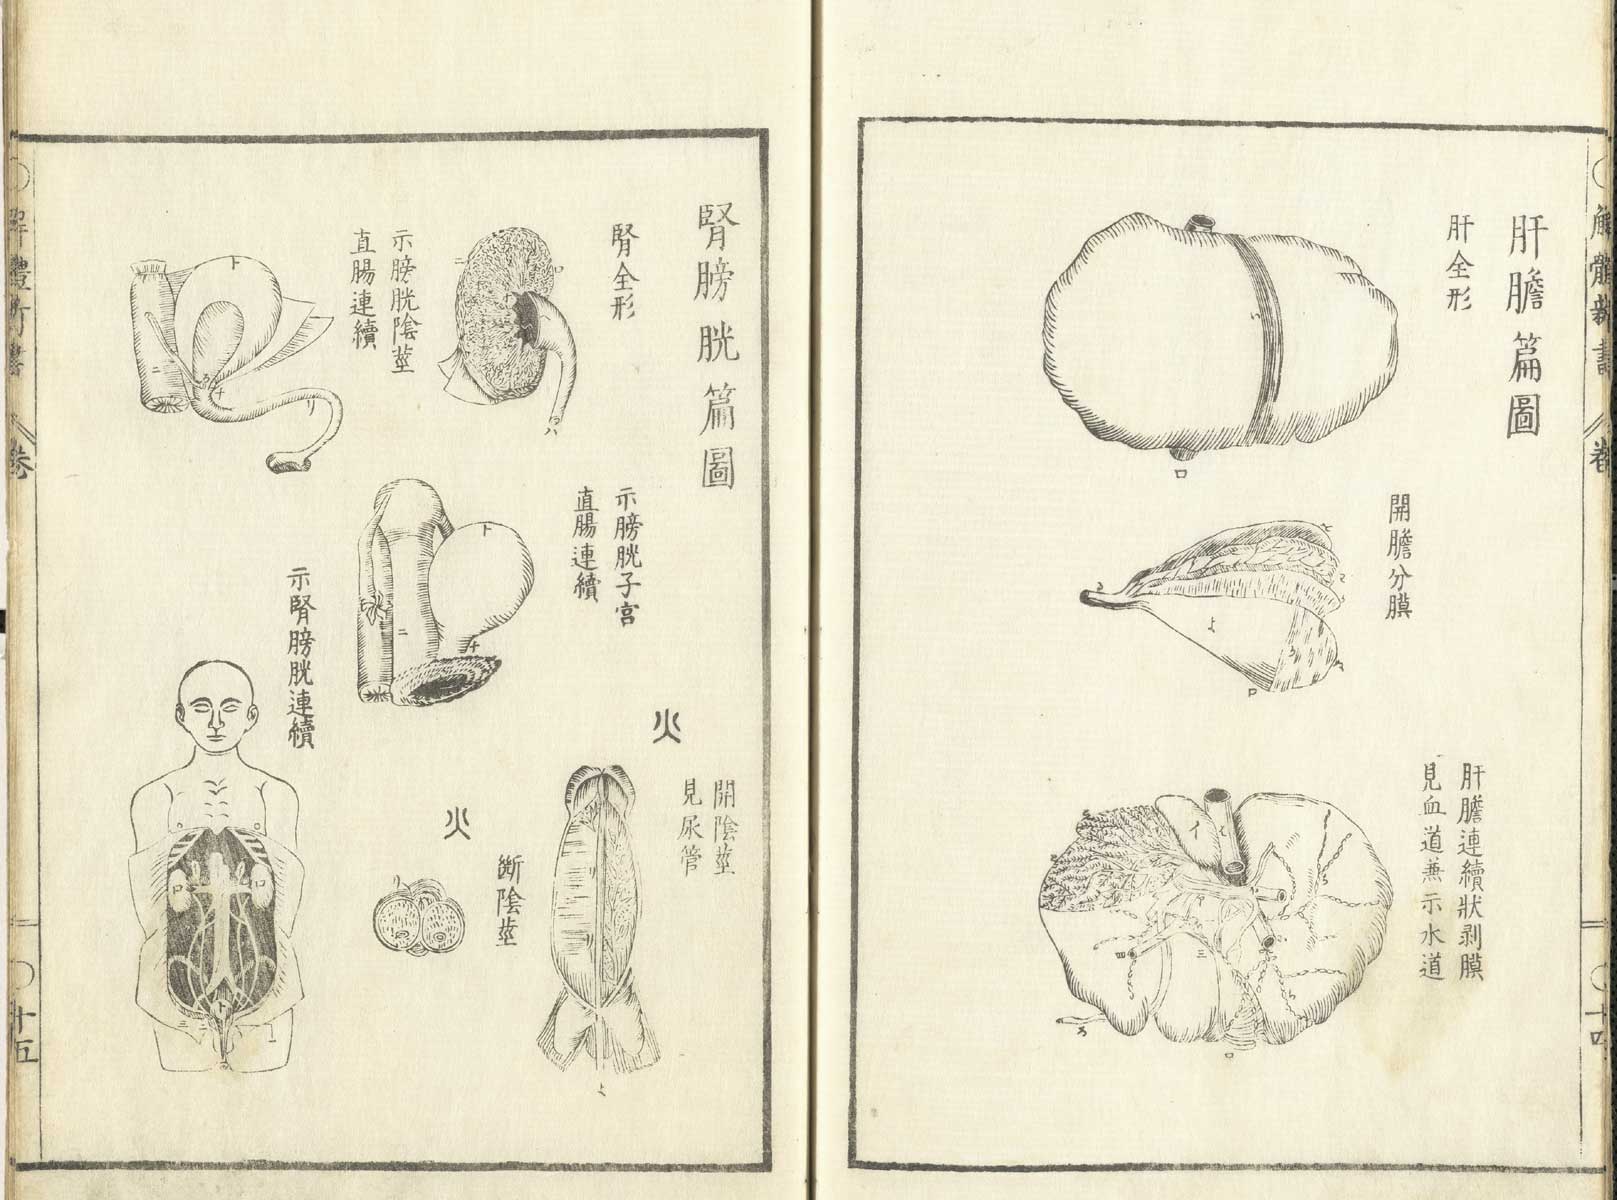 Pages 14 and 15 of Johann Adam Kulmus' Kaitai shinsho. Page 14 are three illustrations of the abdominal cavity organs. Page 15 are six illustrations of the reproductive organs of a male corpse.